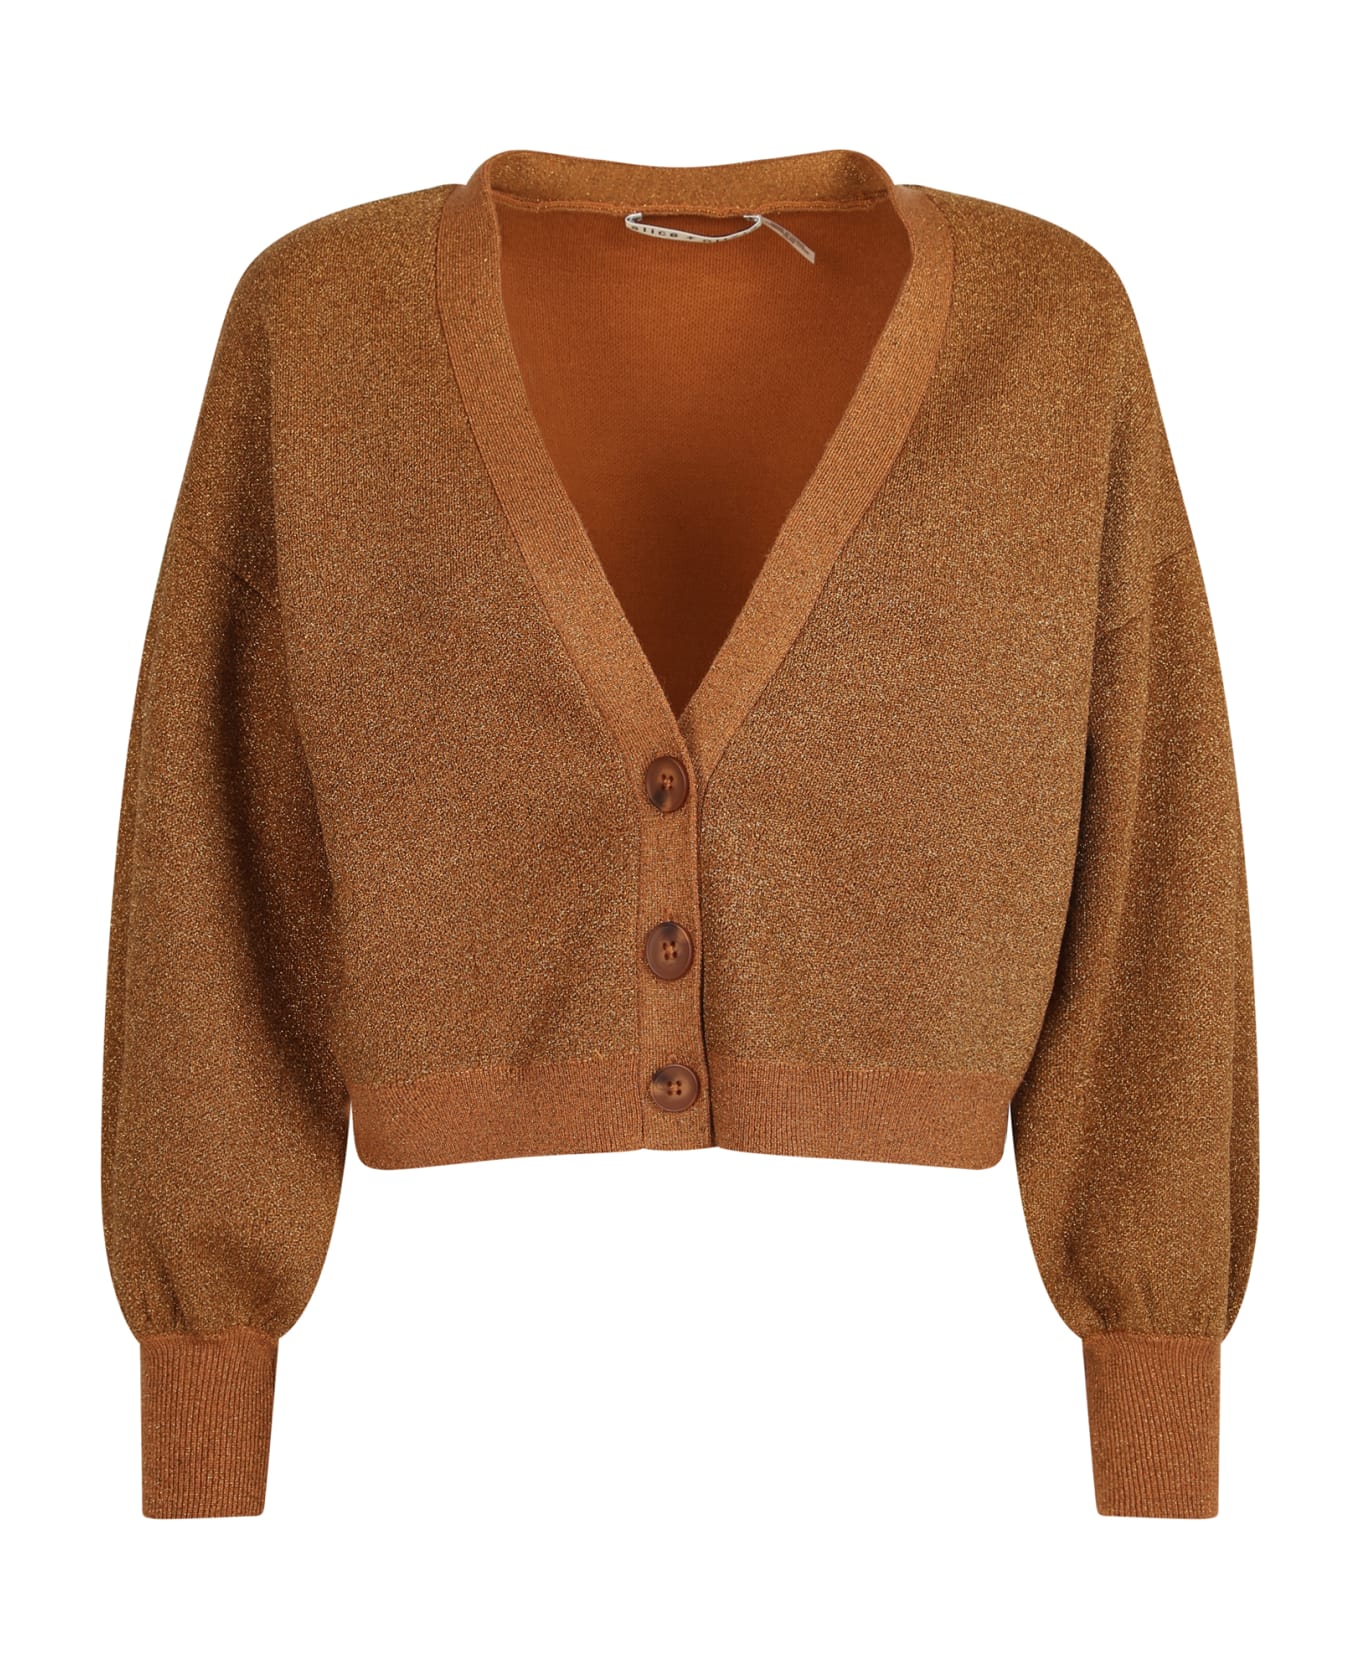 Alice + Olivia Cropped Length Cardigan - Brown